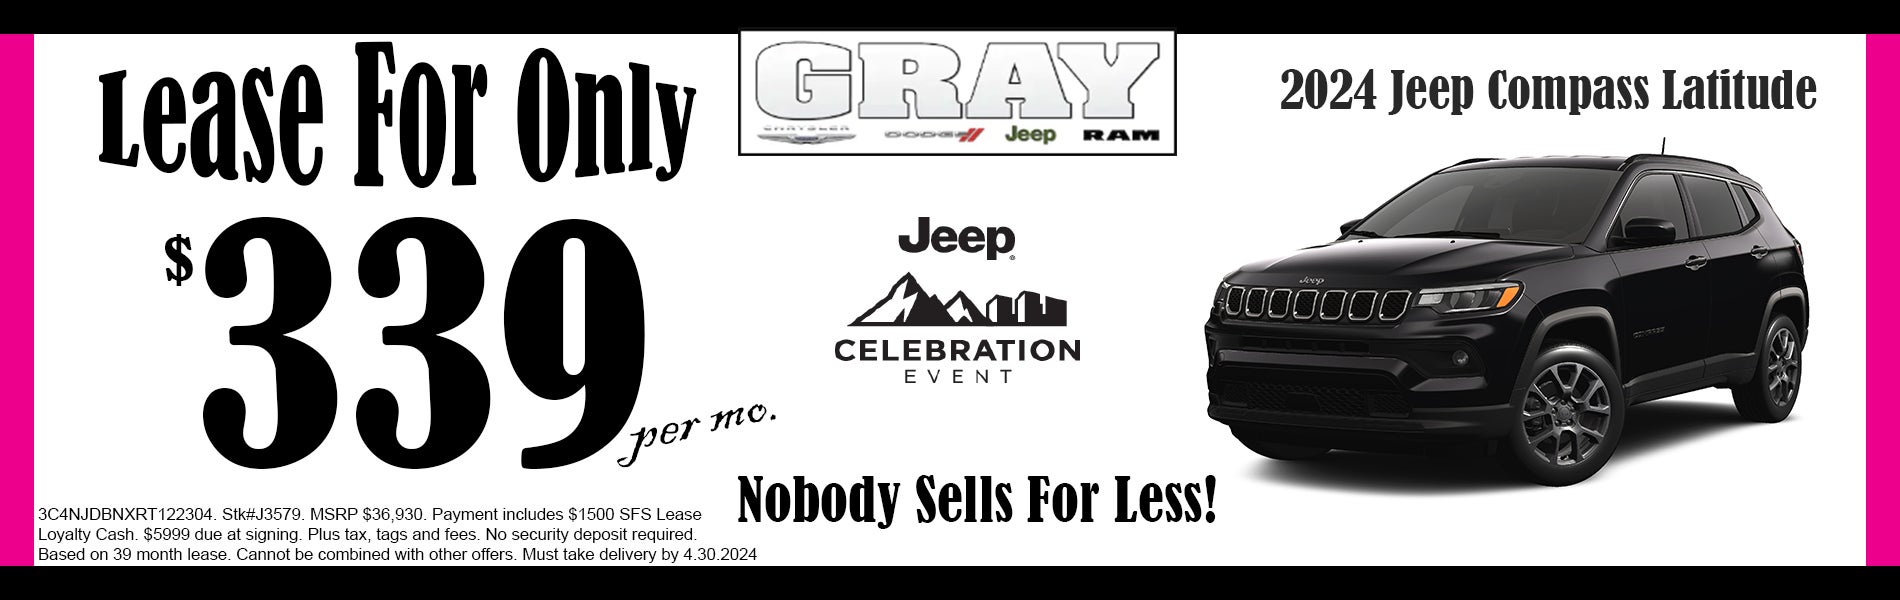 Jeep Compass Lease